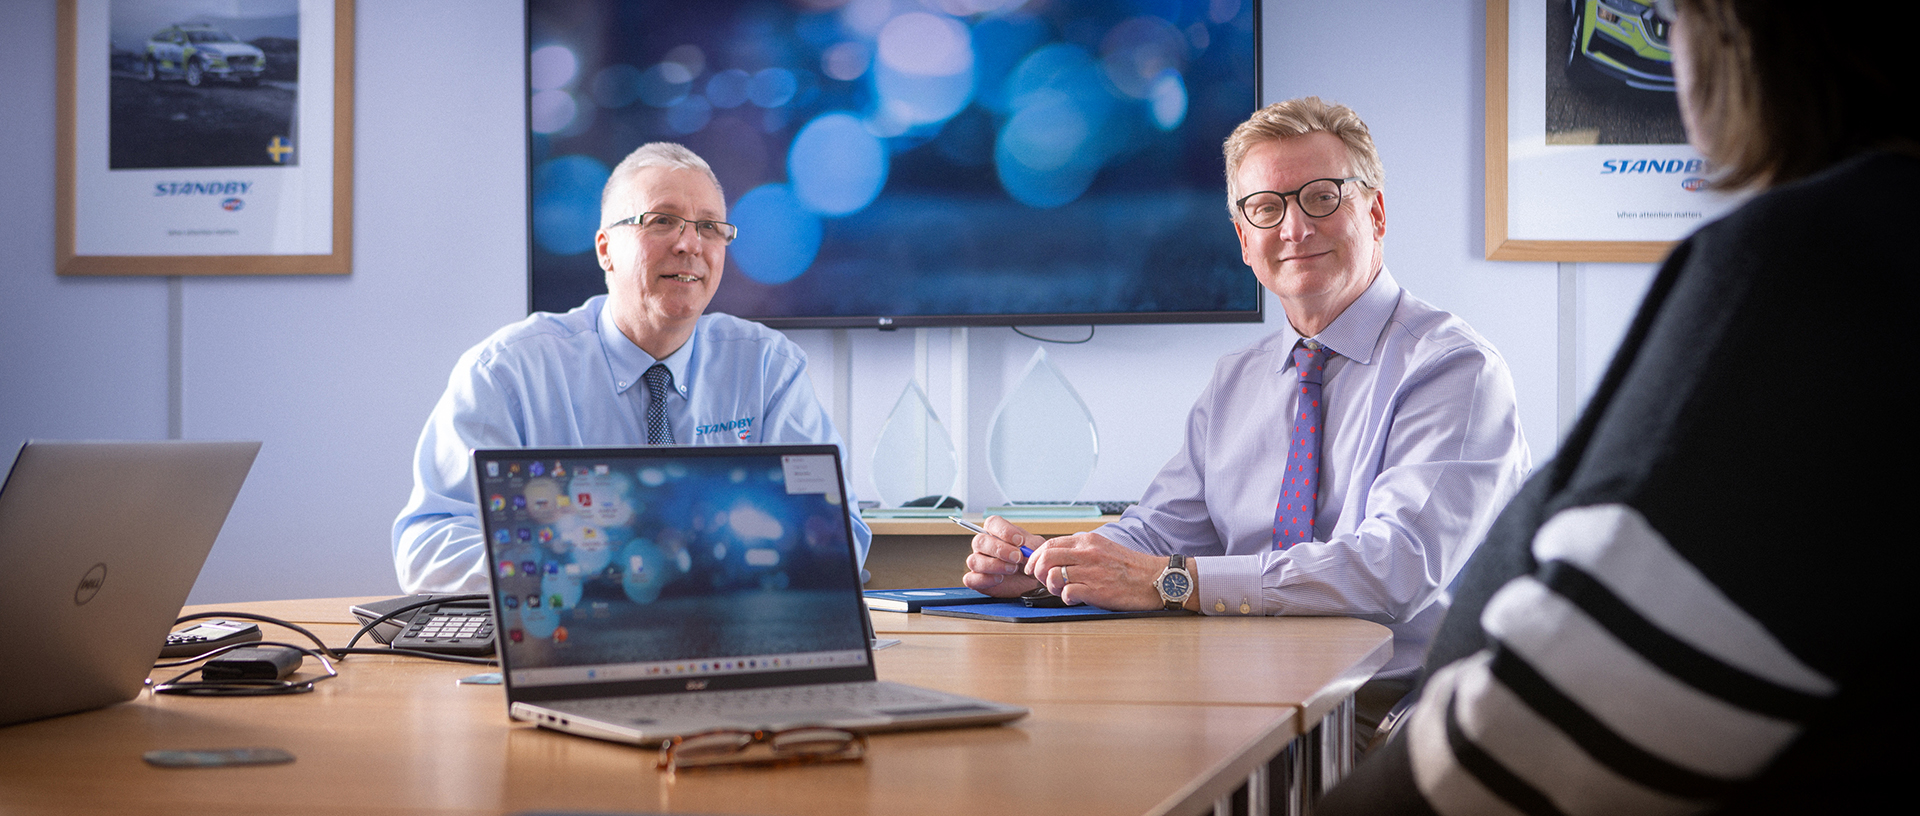 Two smartly dressed workers sit behind table looking to someone off shot to the righthand side, image is taken over their shoulder, the setting is a boardroom, a laptop is open and on, facing the camera in the middle of the image